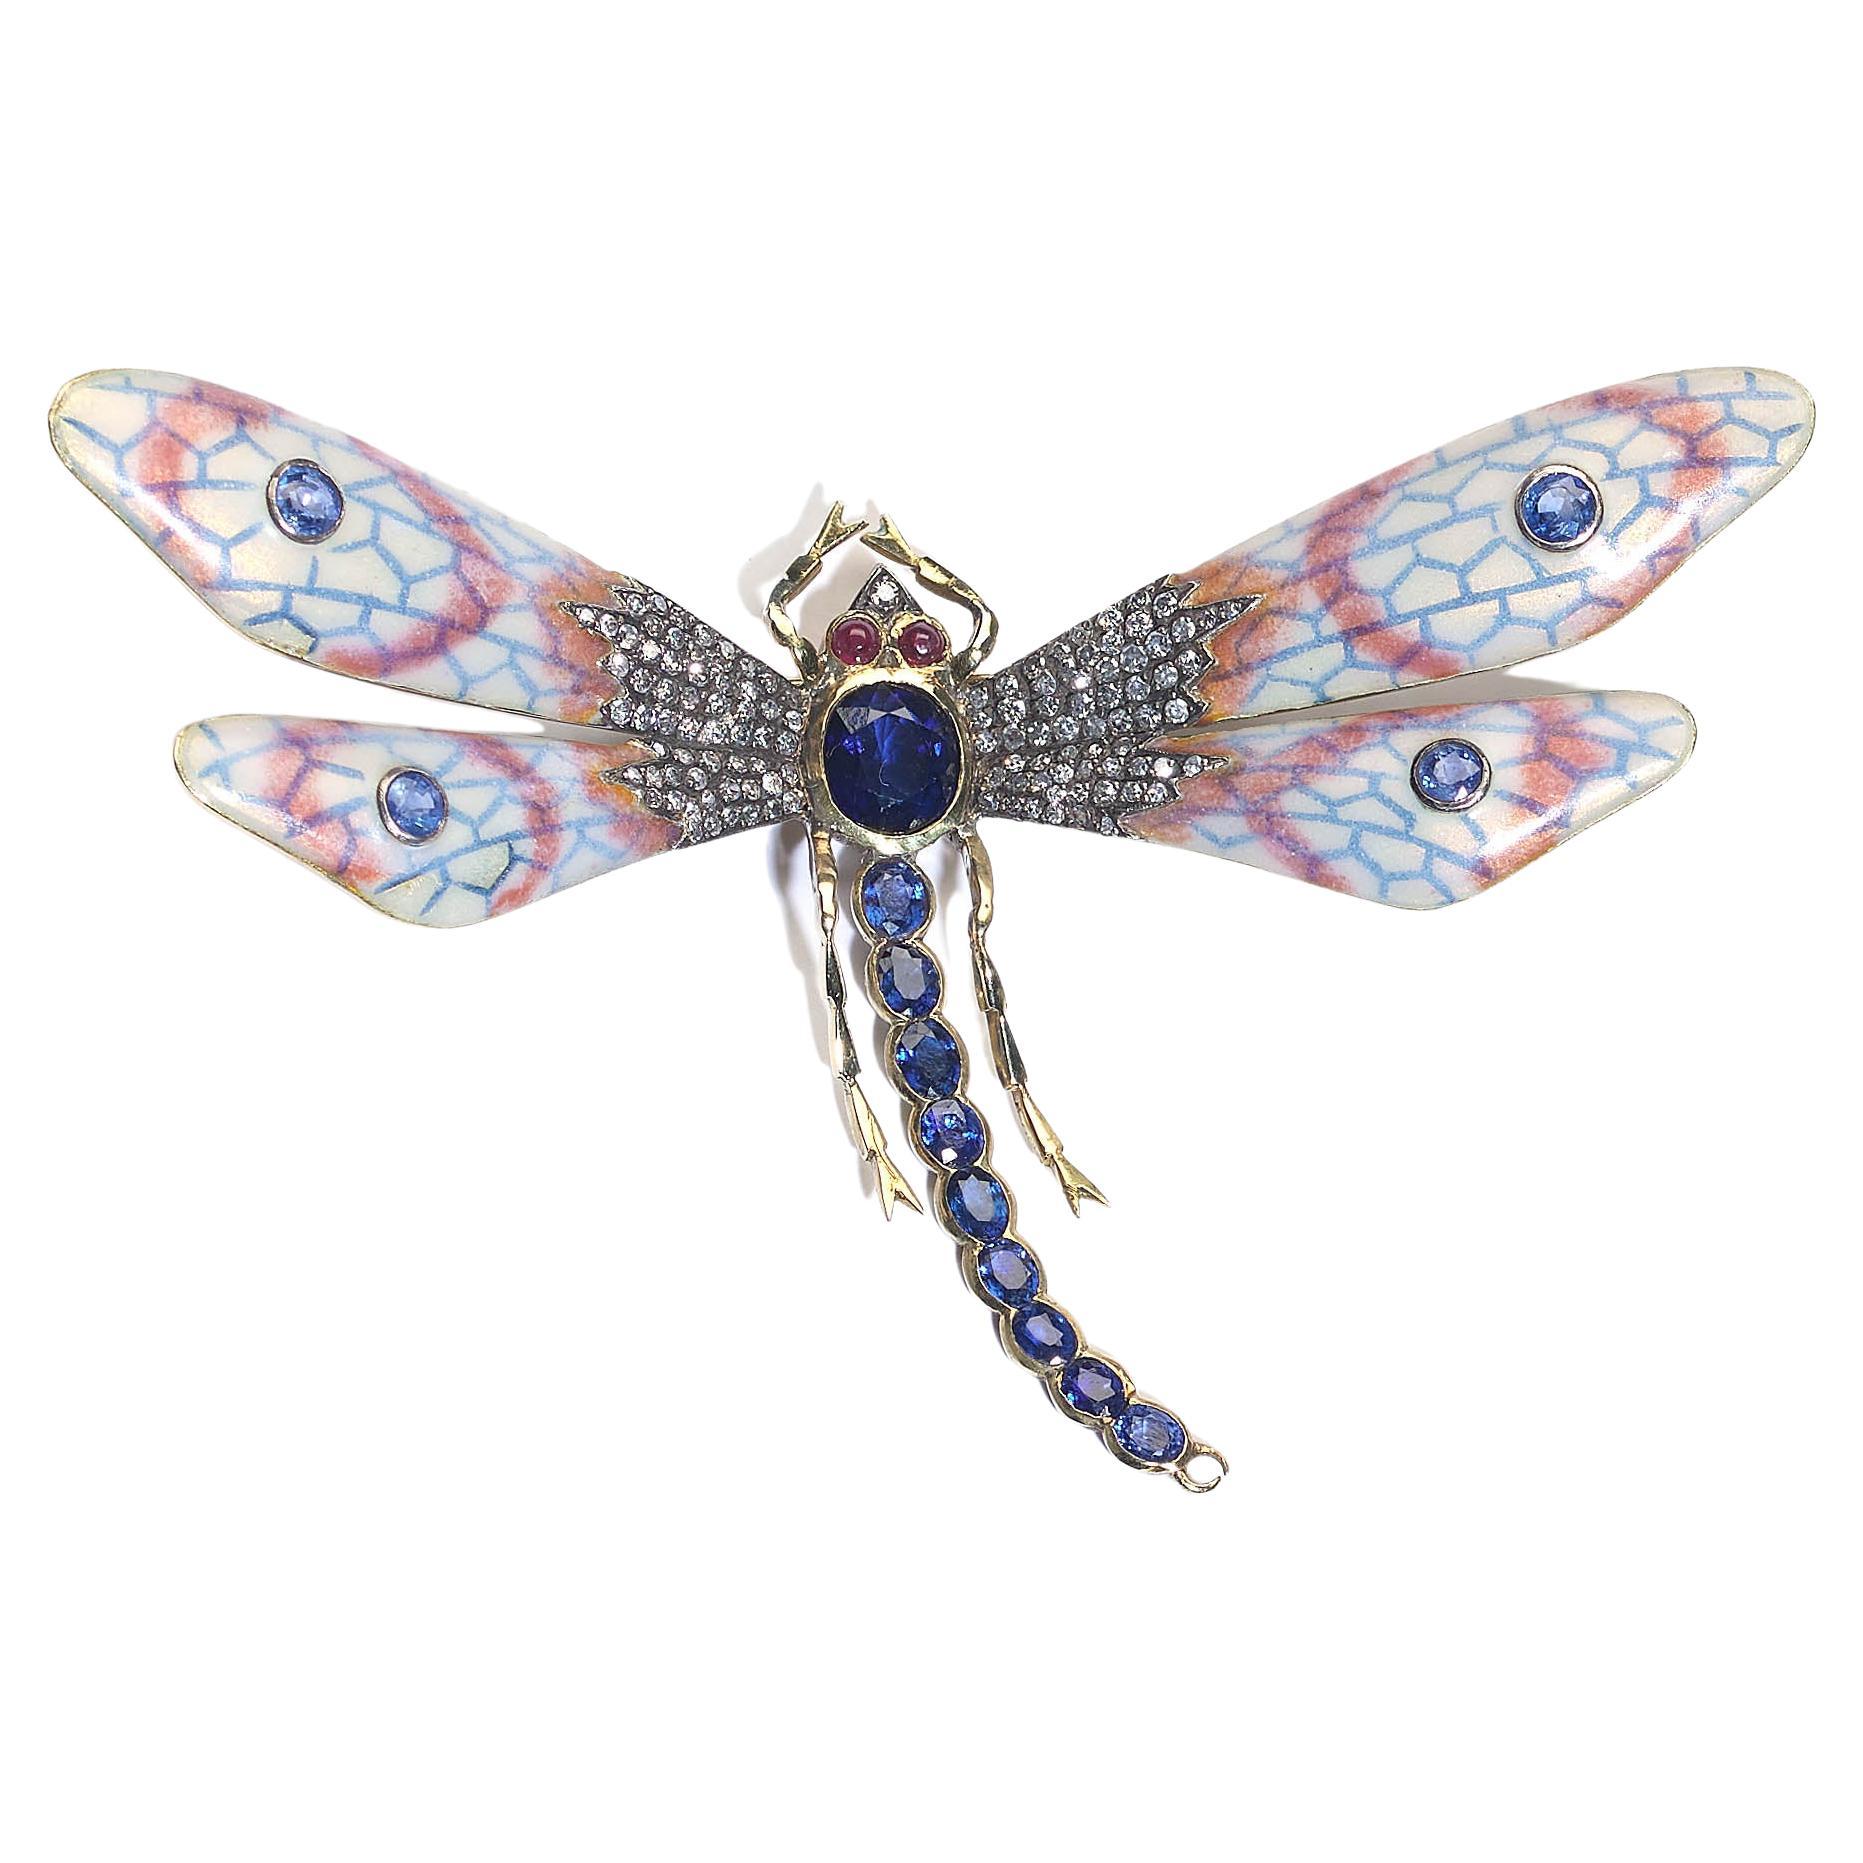 Dragonfly Brooch - 92 For Sale on 1stDibs